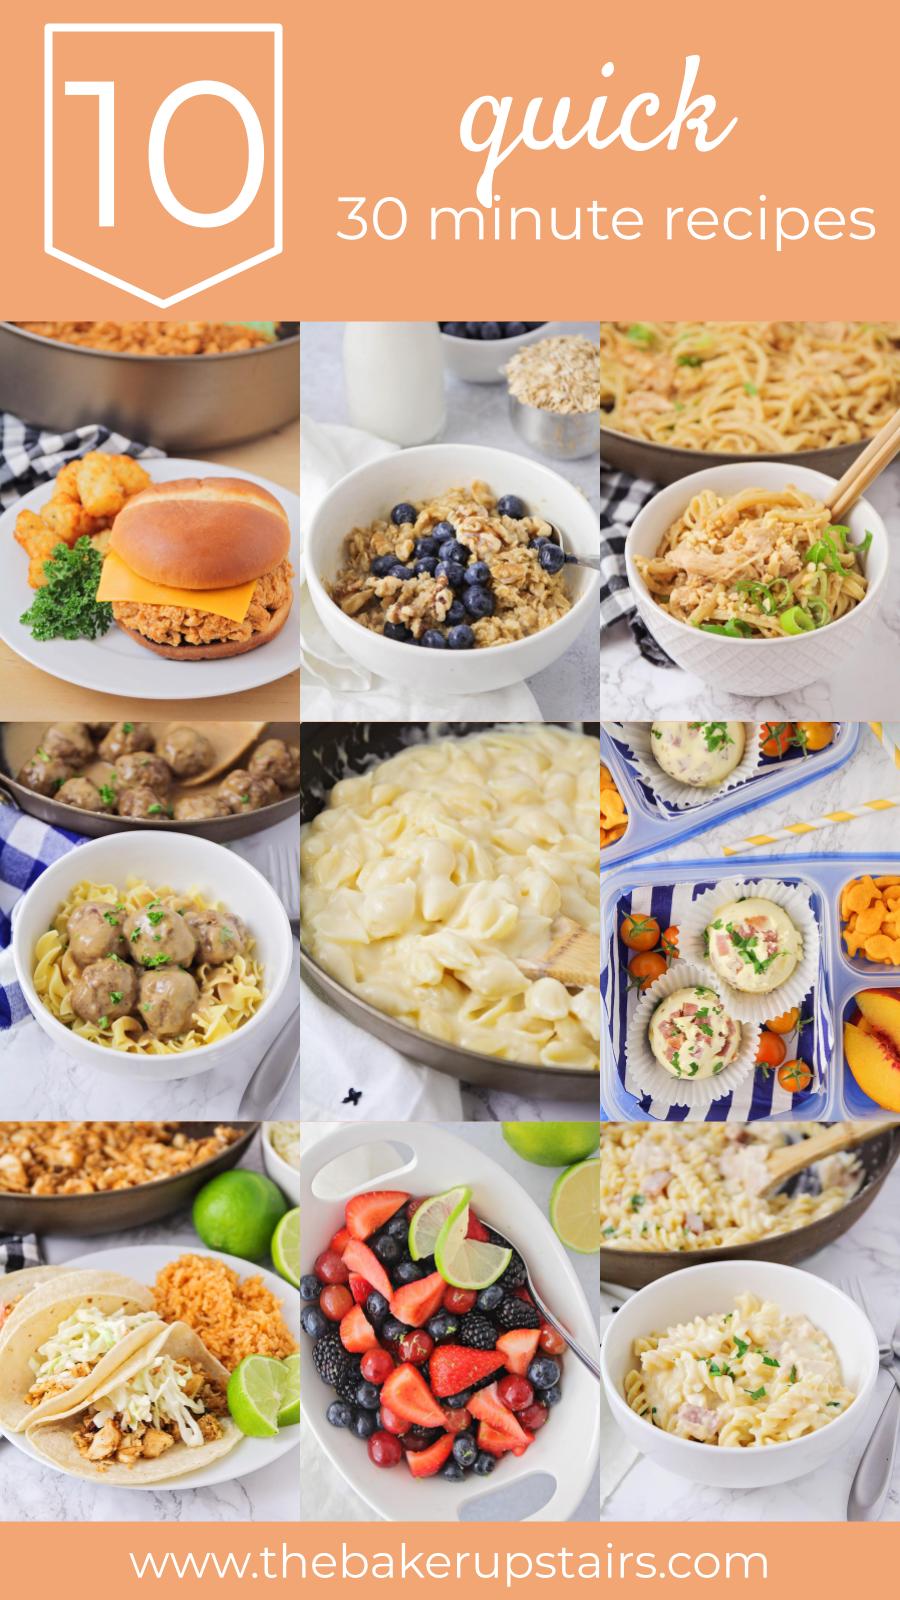 10 Quick 30 Minute Recipes - These recipes are easy and simple! They take half an hour or under, which makes them perfect for a quick meal!